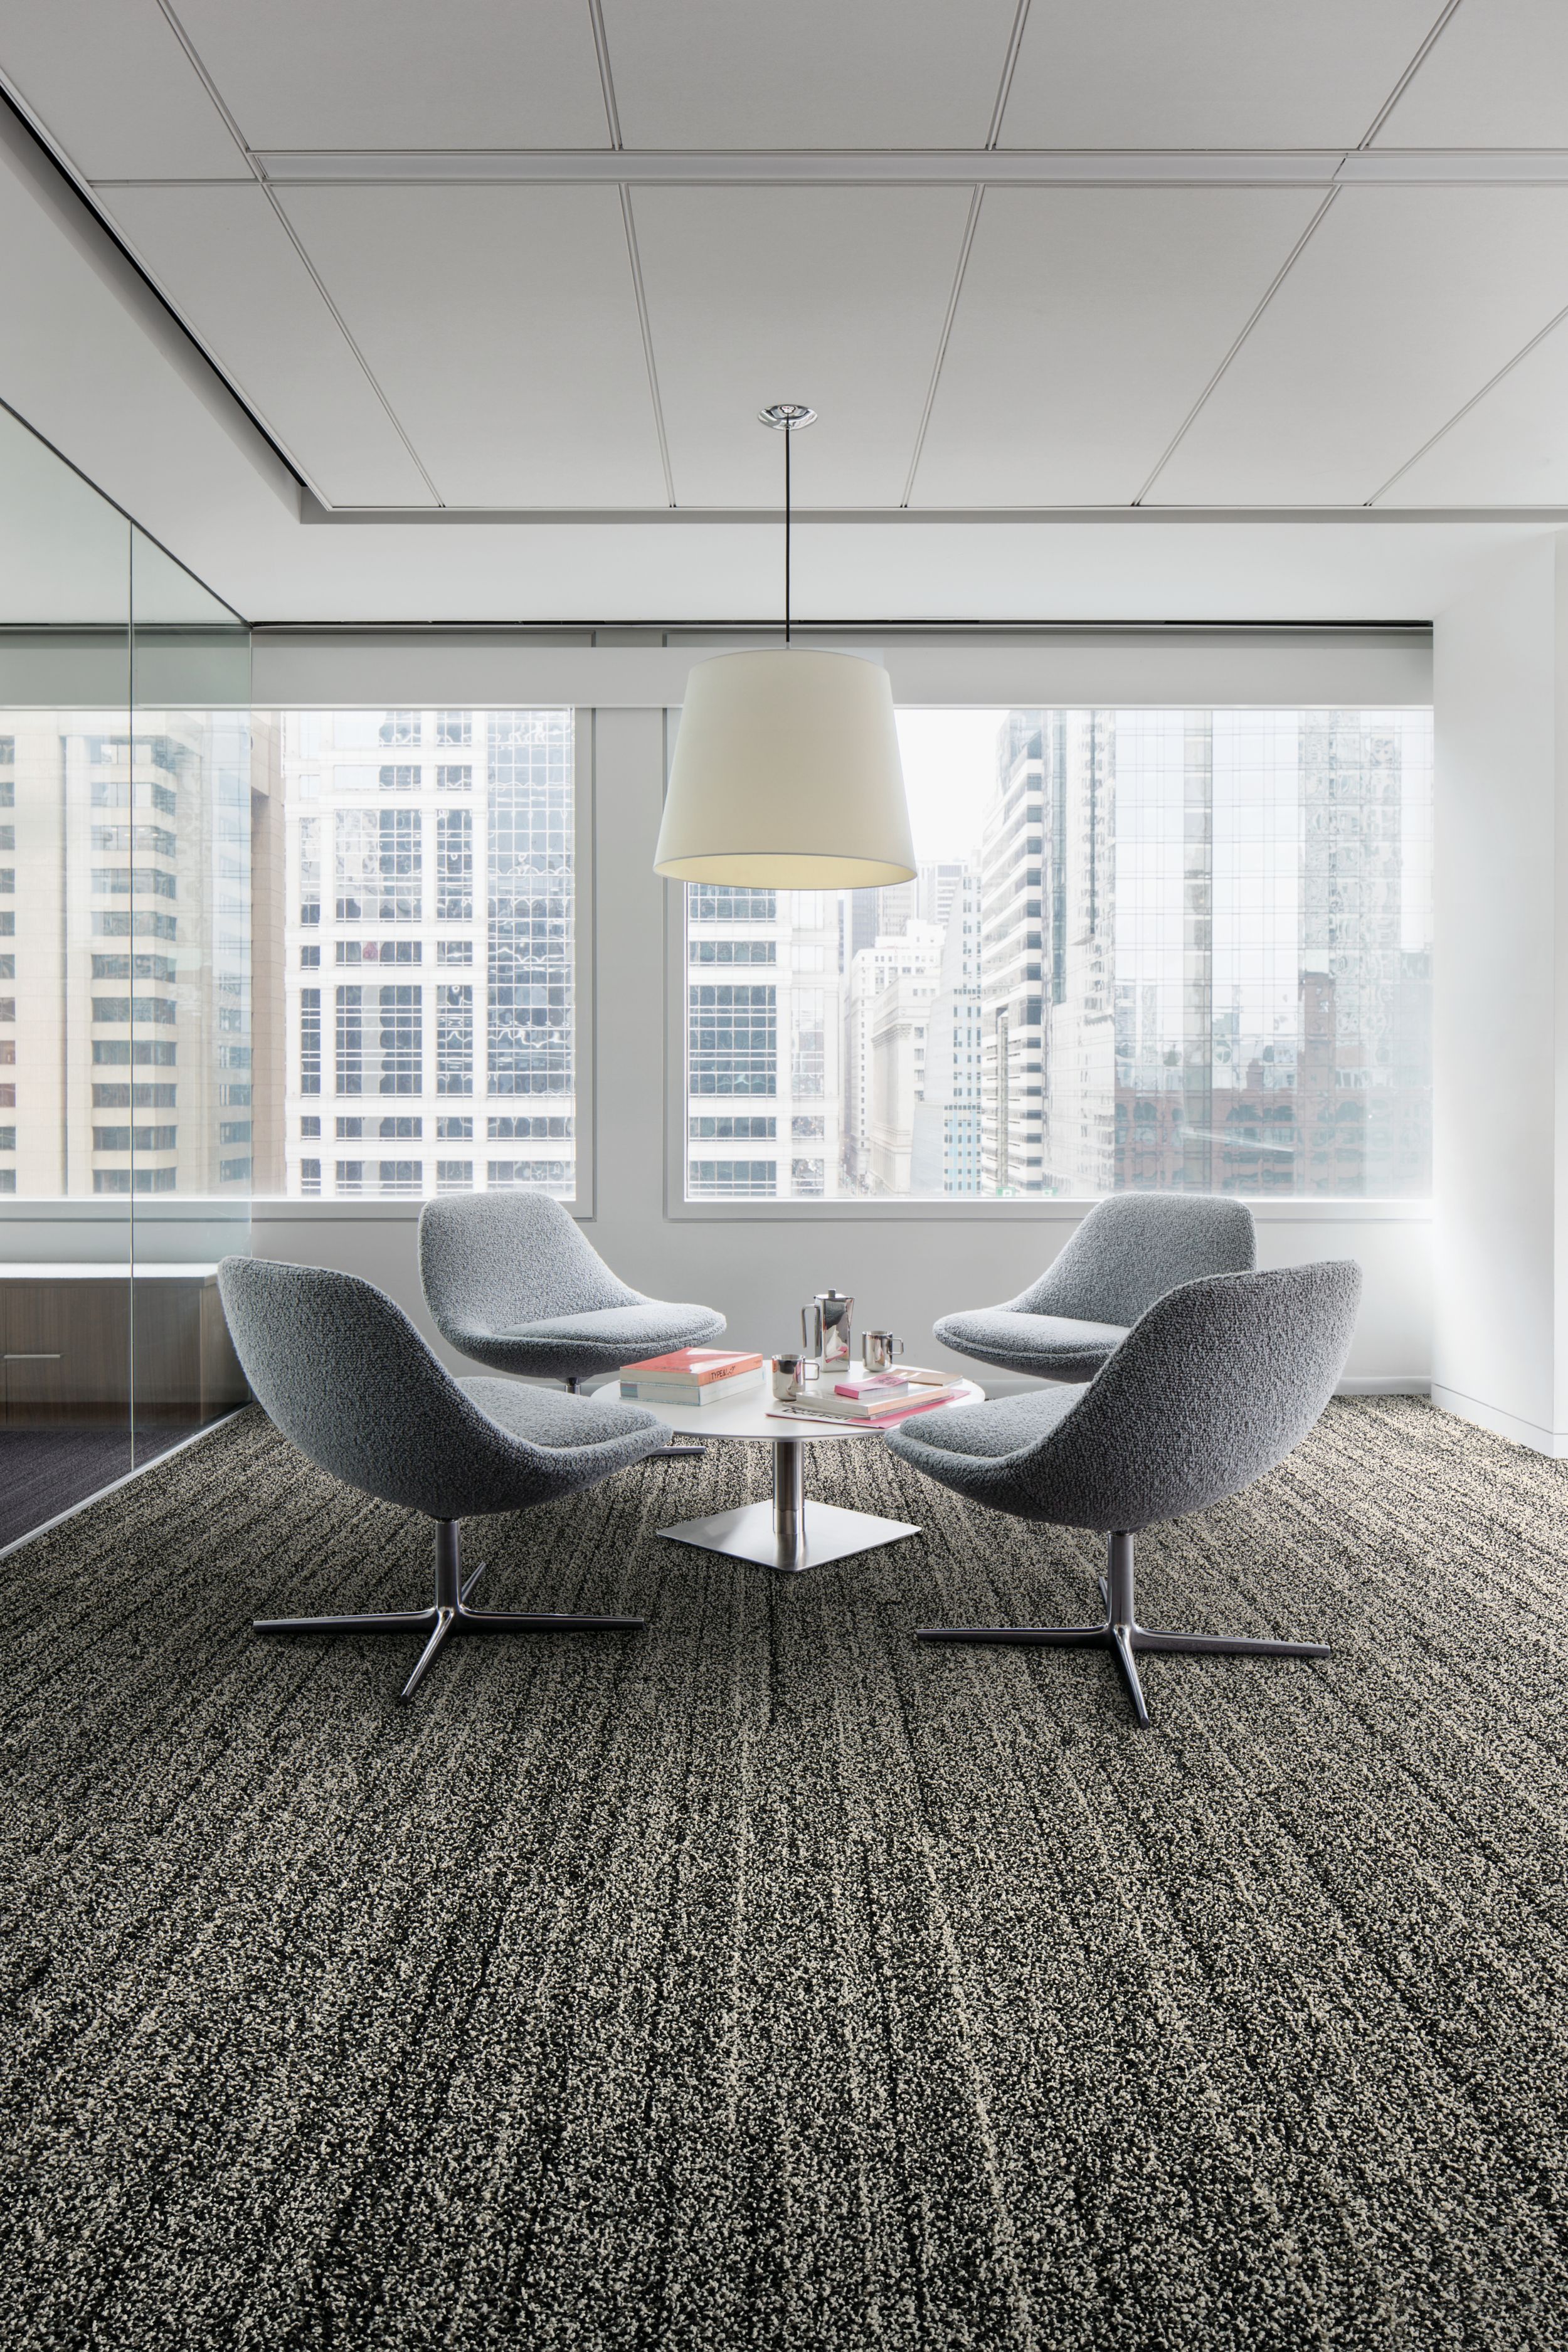 Interface Overedge plank carpet tile with fabric chairs around round table número de imagen 6